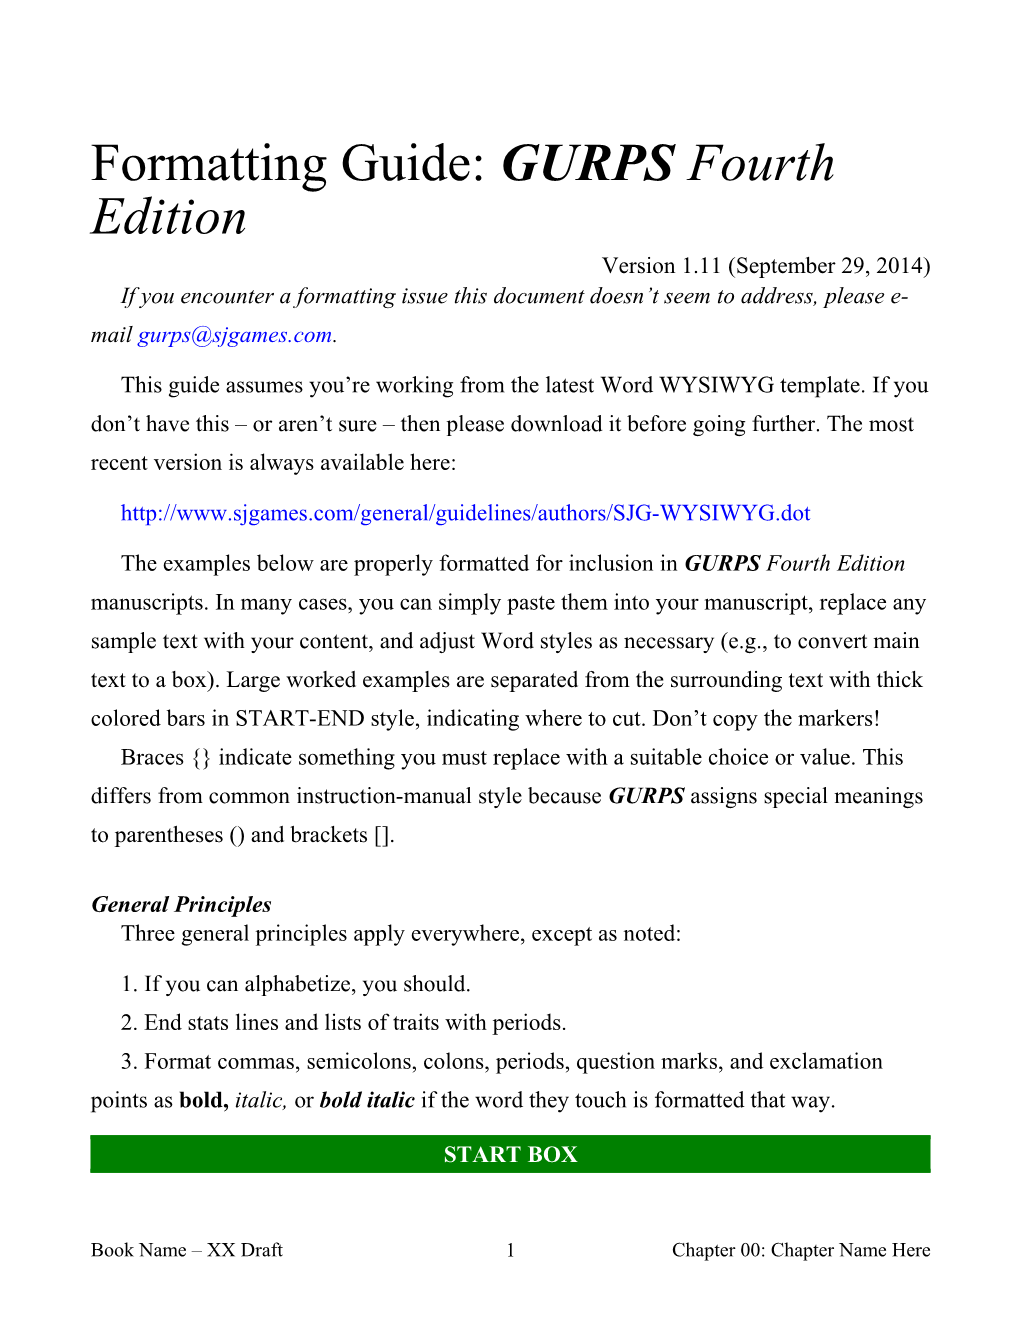 Formatting Guide: GURPS Fourth Edition